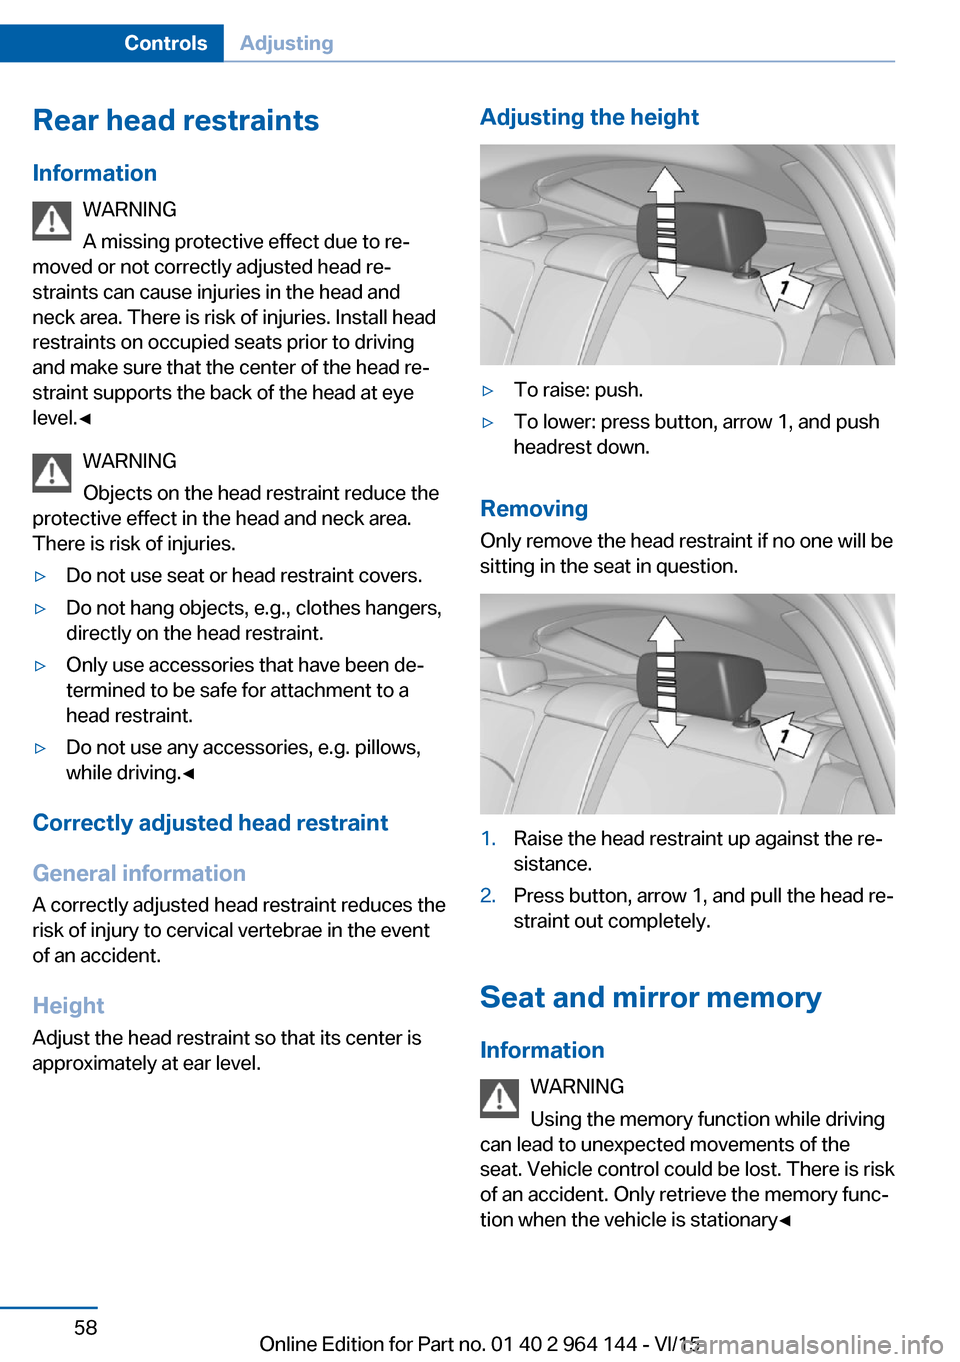 BMW X4 2016 F26 Owners Manual Rear head restraints
Information WARNING
A missing protective effect due to re‐
moved or not correctly adjusted head re‐
straints can cause injuries in the head and
neck area. There is risk of inj